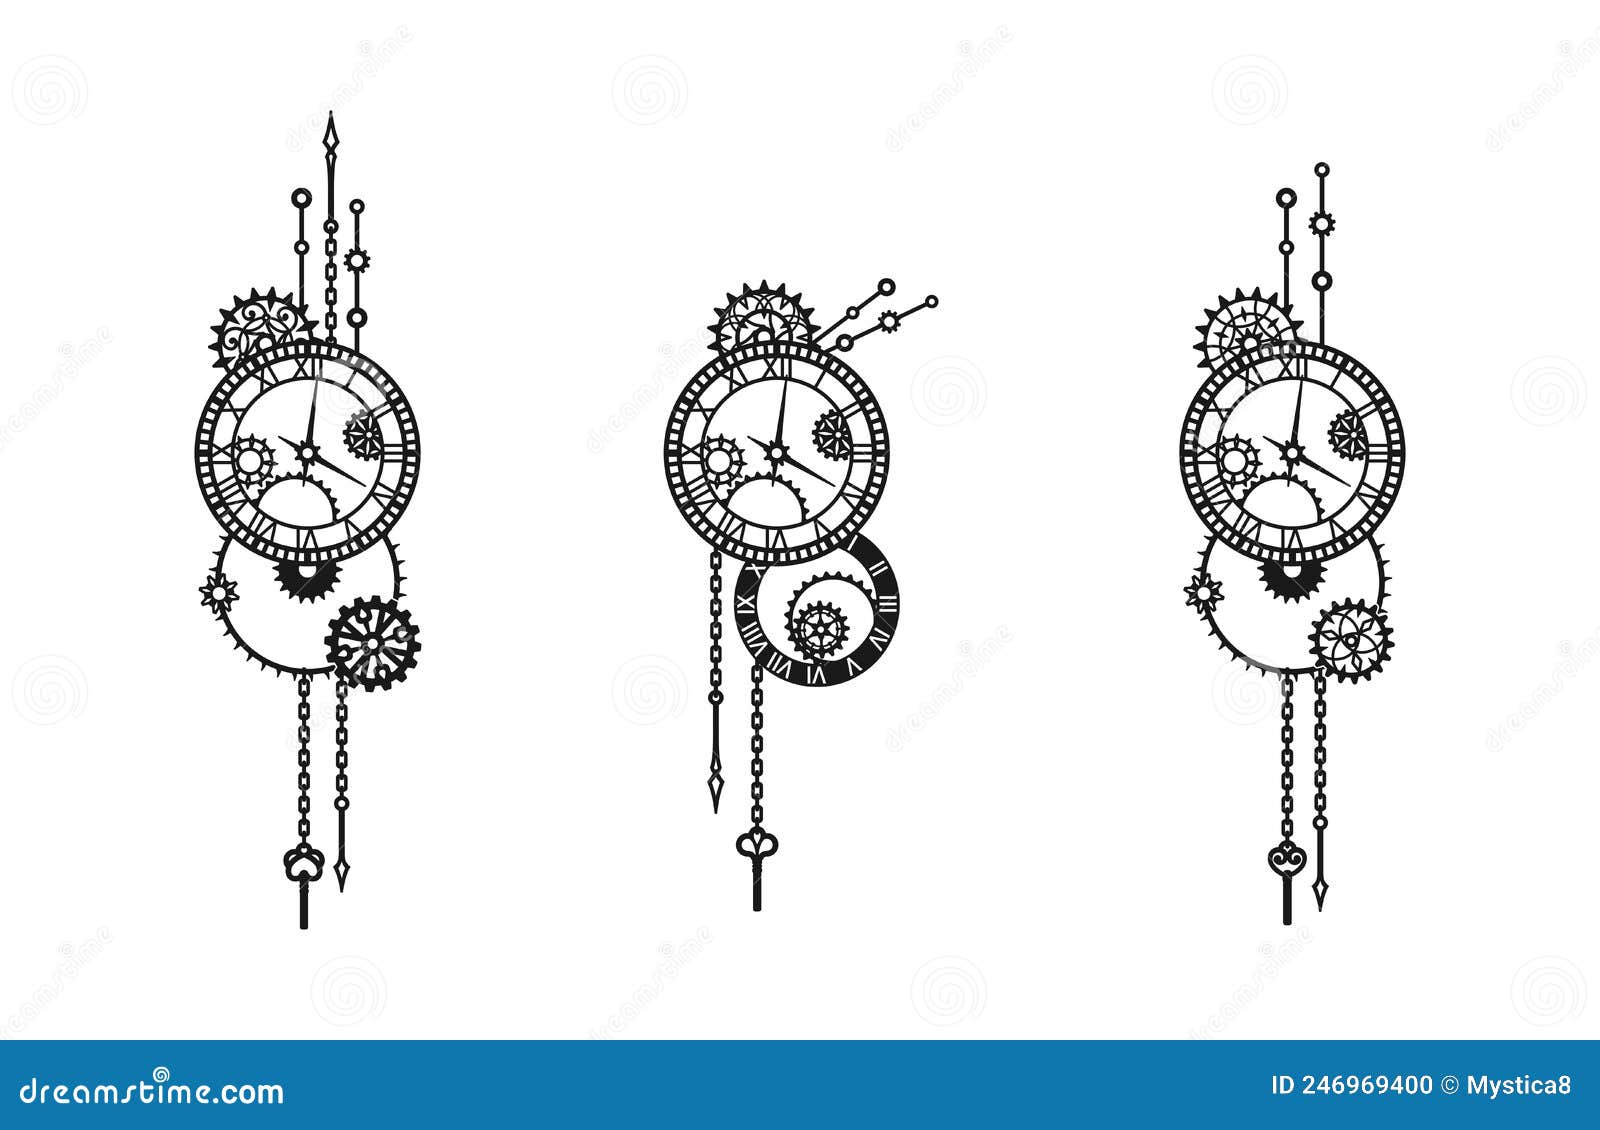 11+ Clockwork Tattoo Ideas You'll Have To See To Believe! - alexie